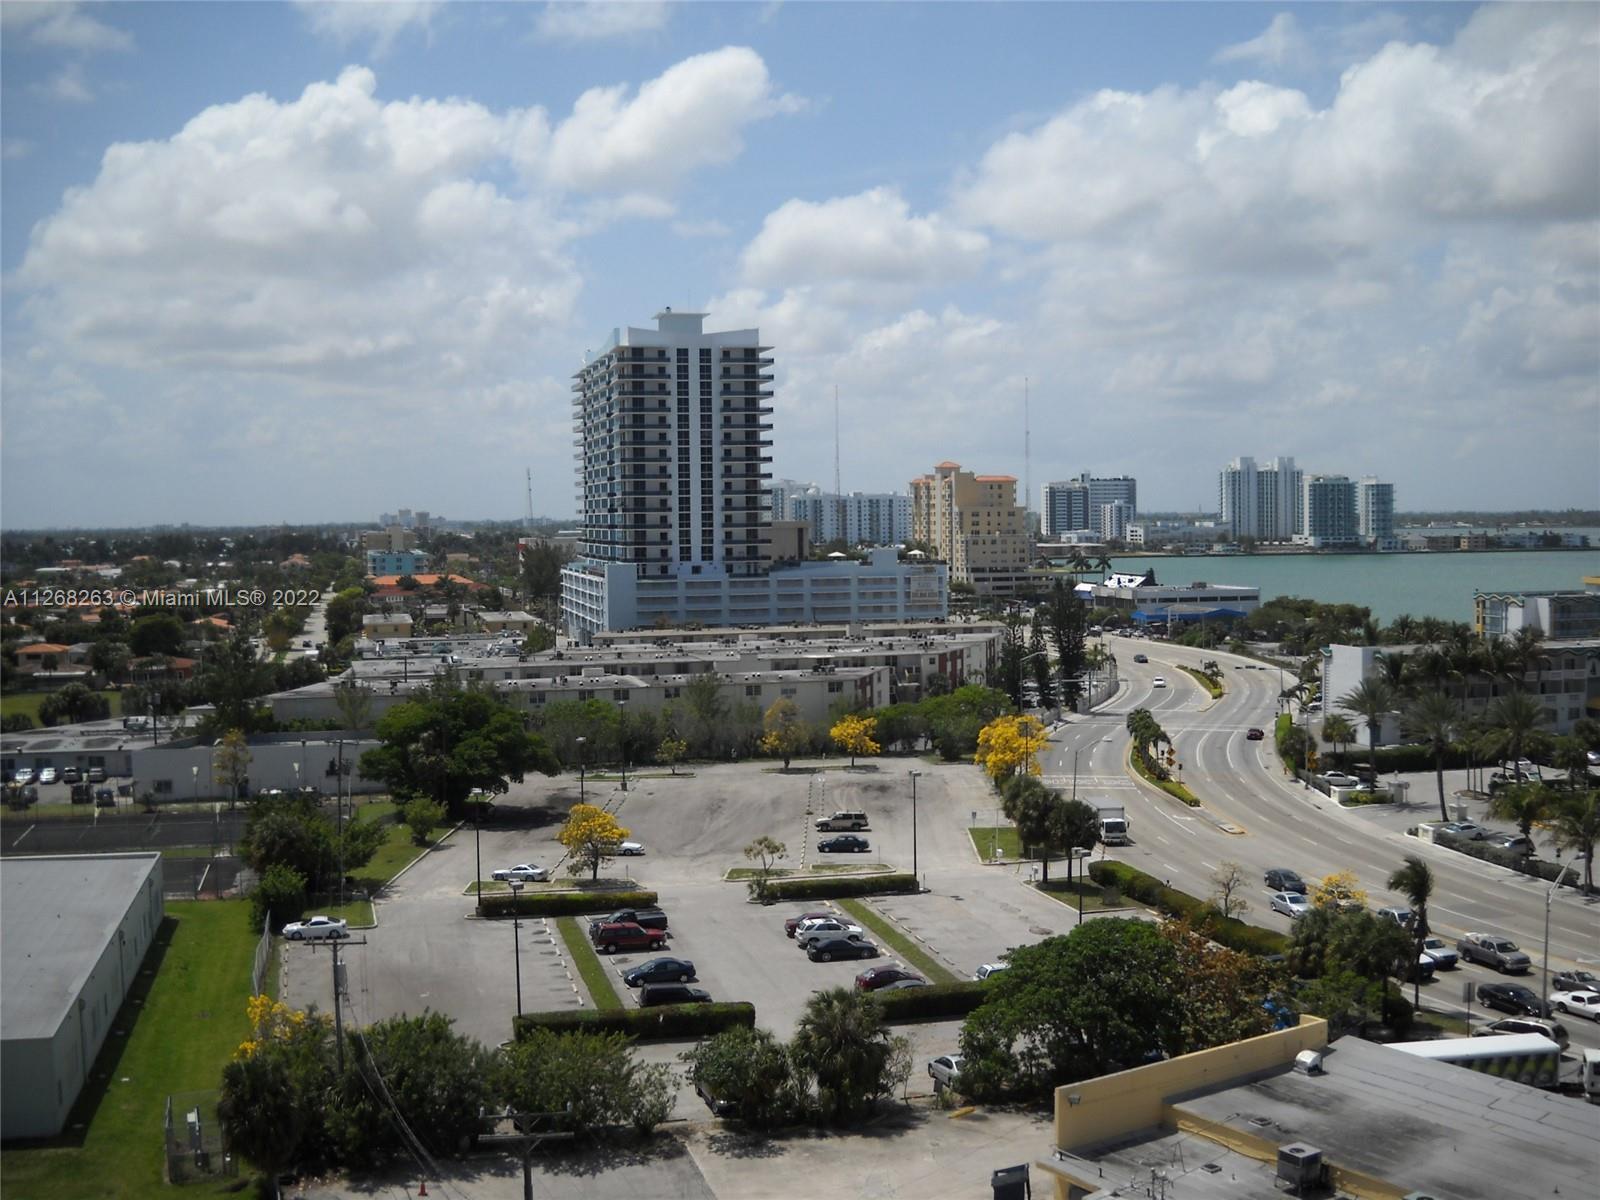 2 bedrooms and 2 full bathrooms. Gorgeous views from every where. Split floor plan. Bright unit with